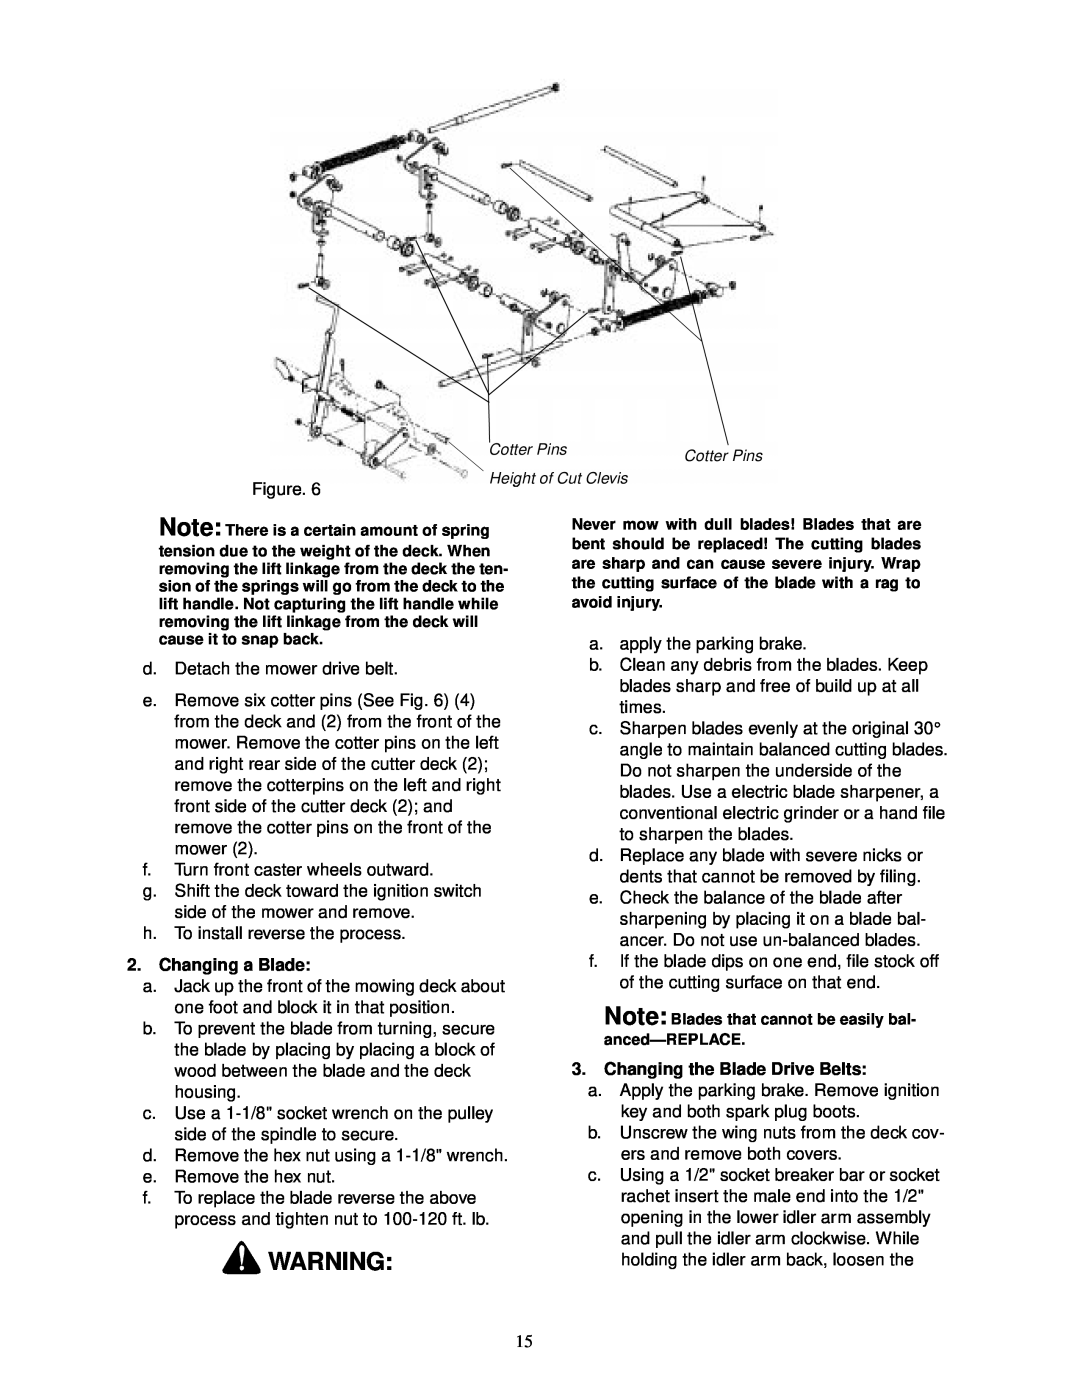 Cub Cadet 18HP service manual Changing a Blade, Changing the Blade Drive Belts 